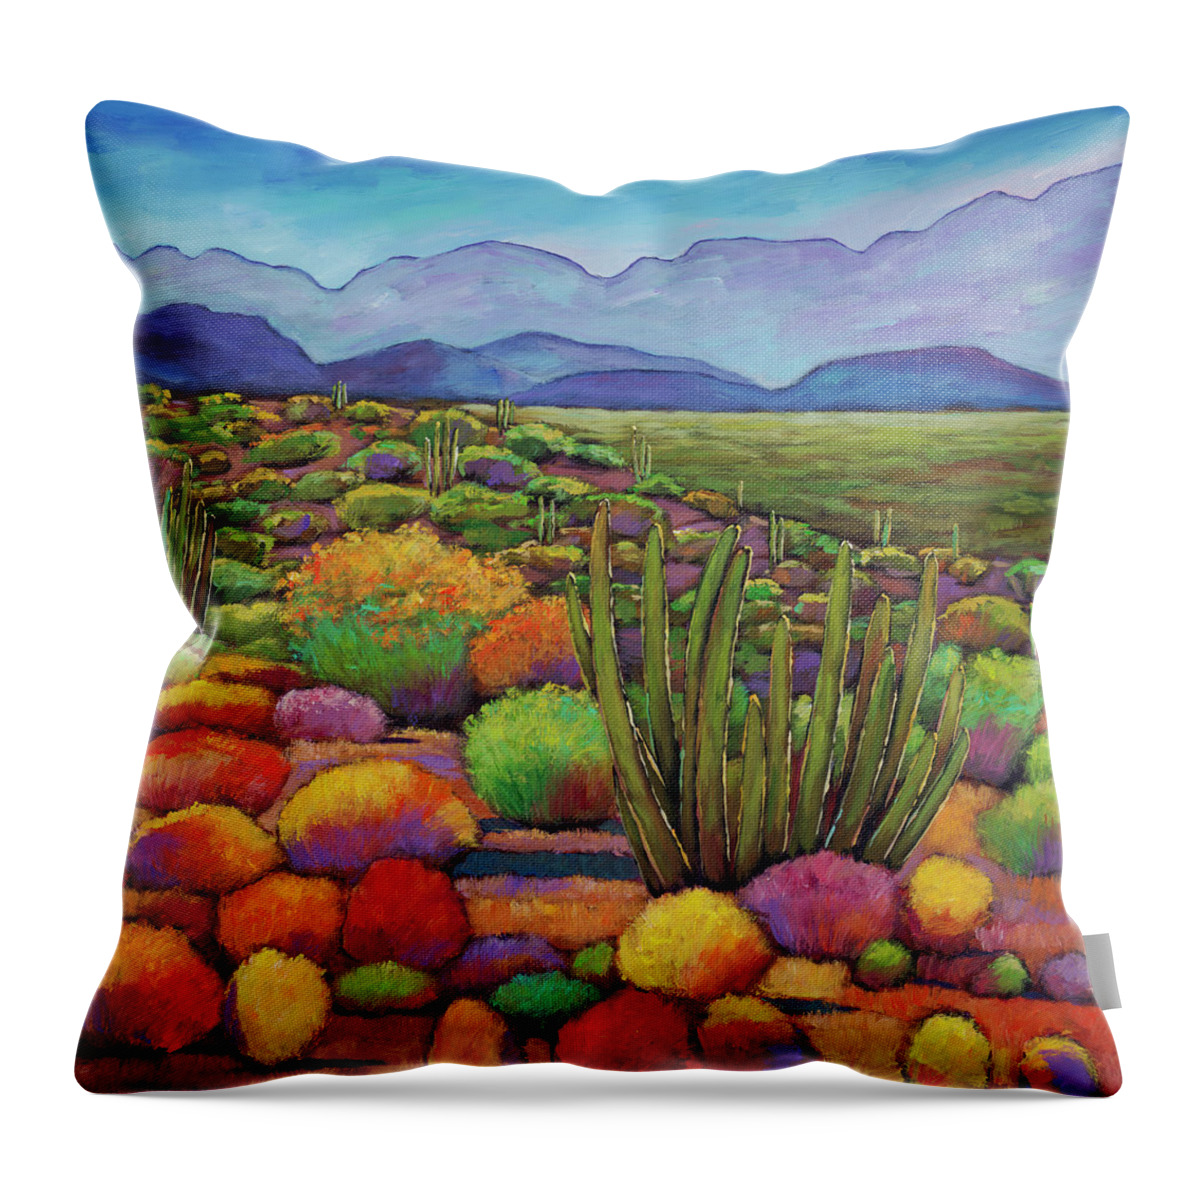 Desert Landscape Throw Pillow featuring the painting Organ Pipe by Johnathan Harris